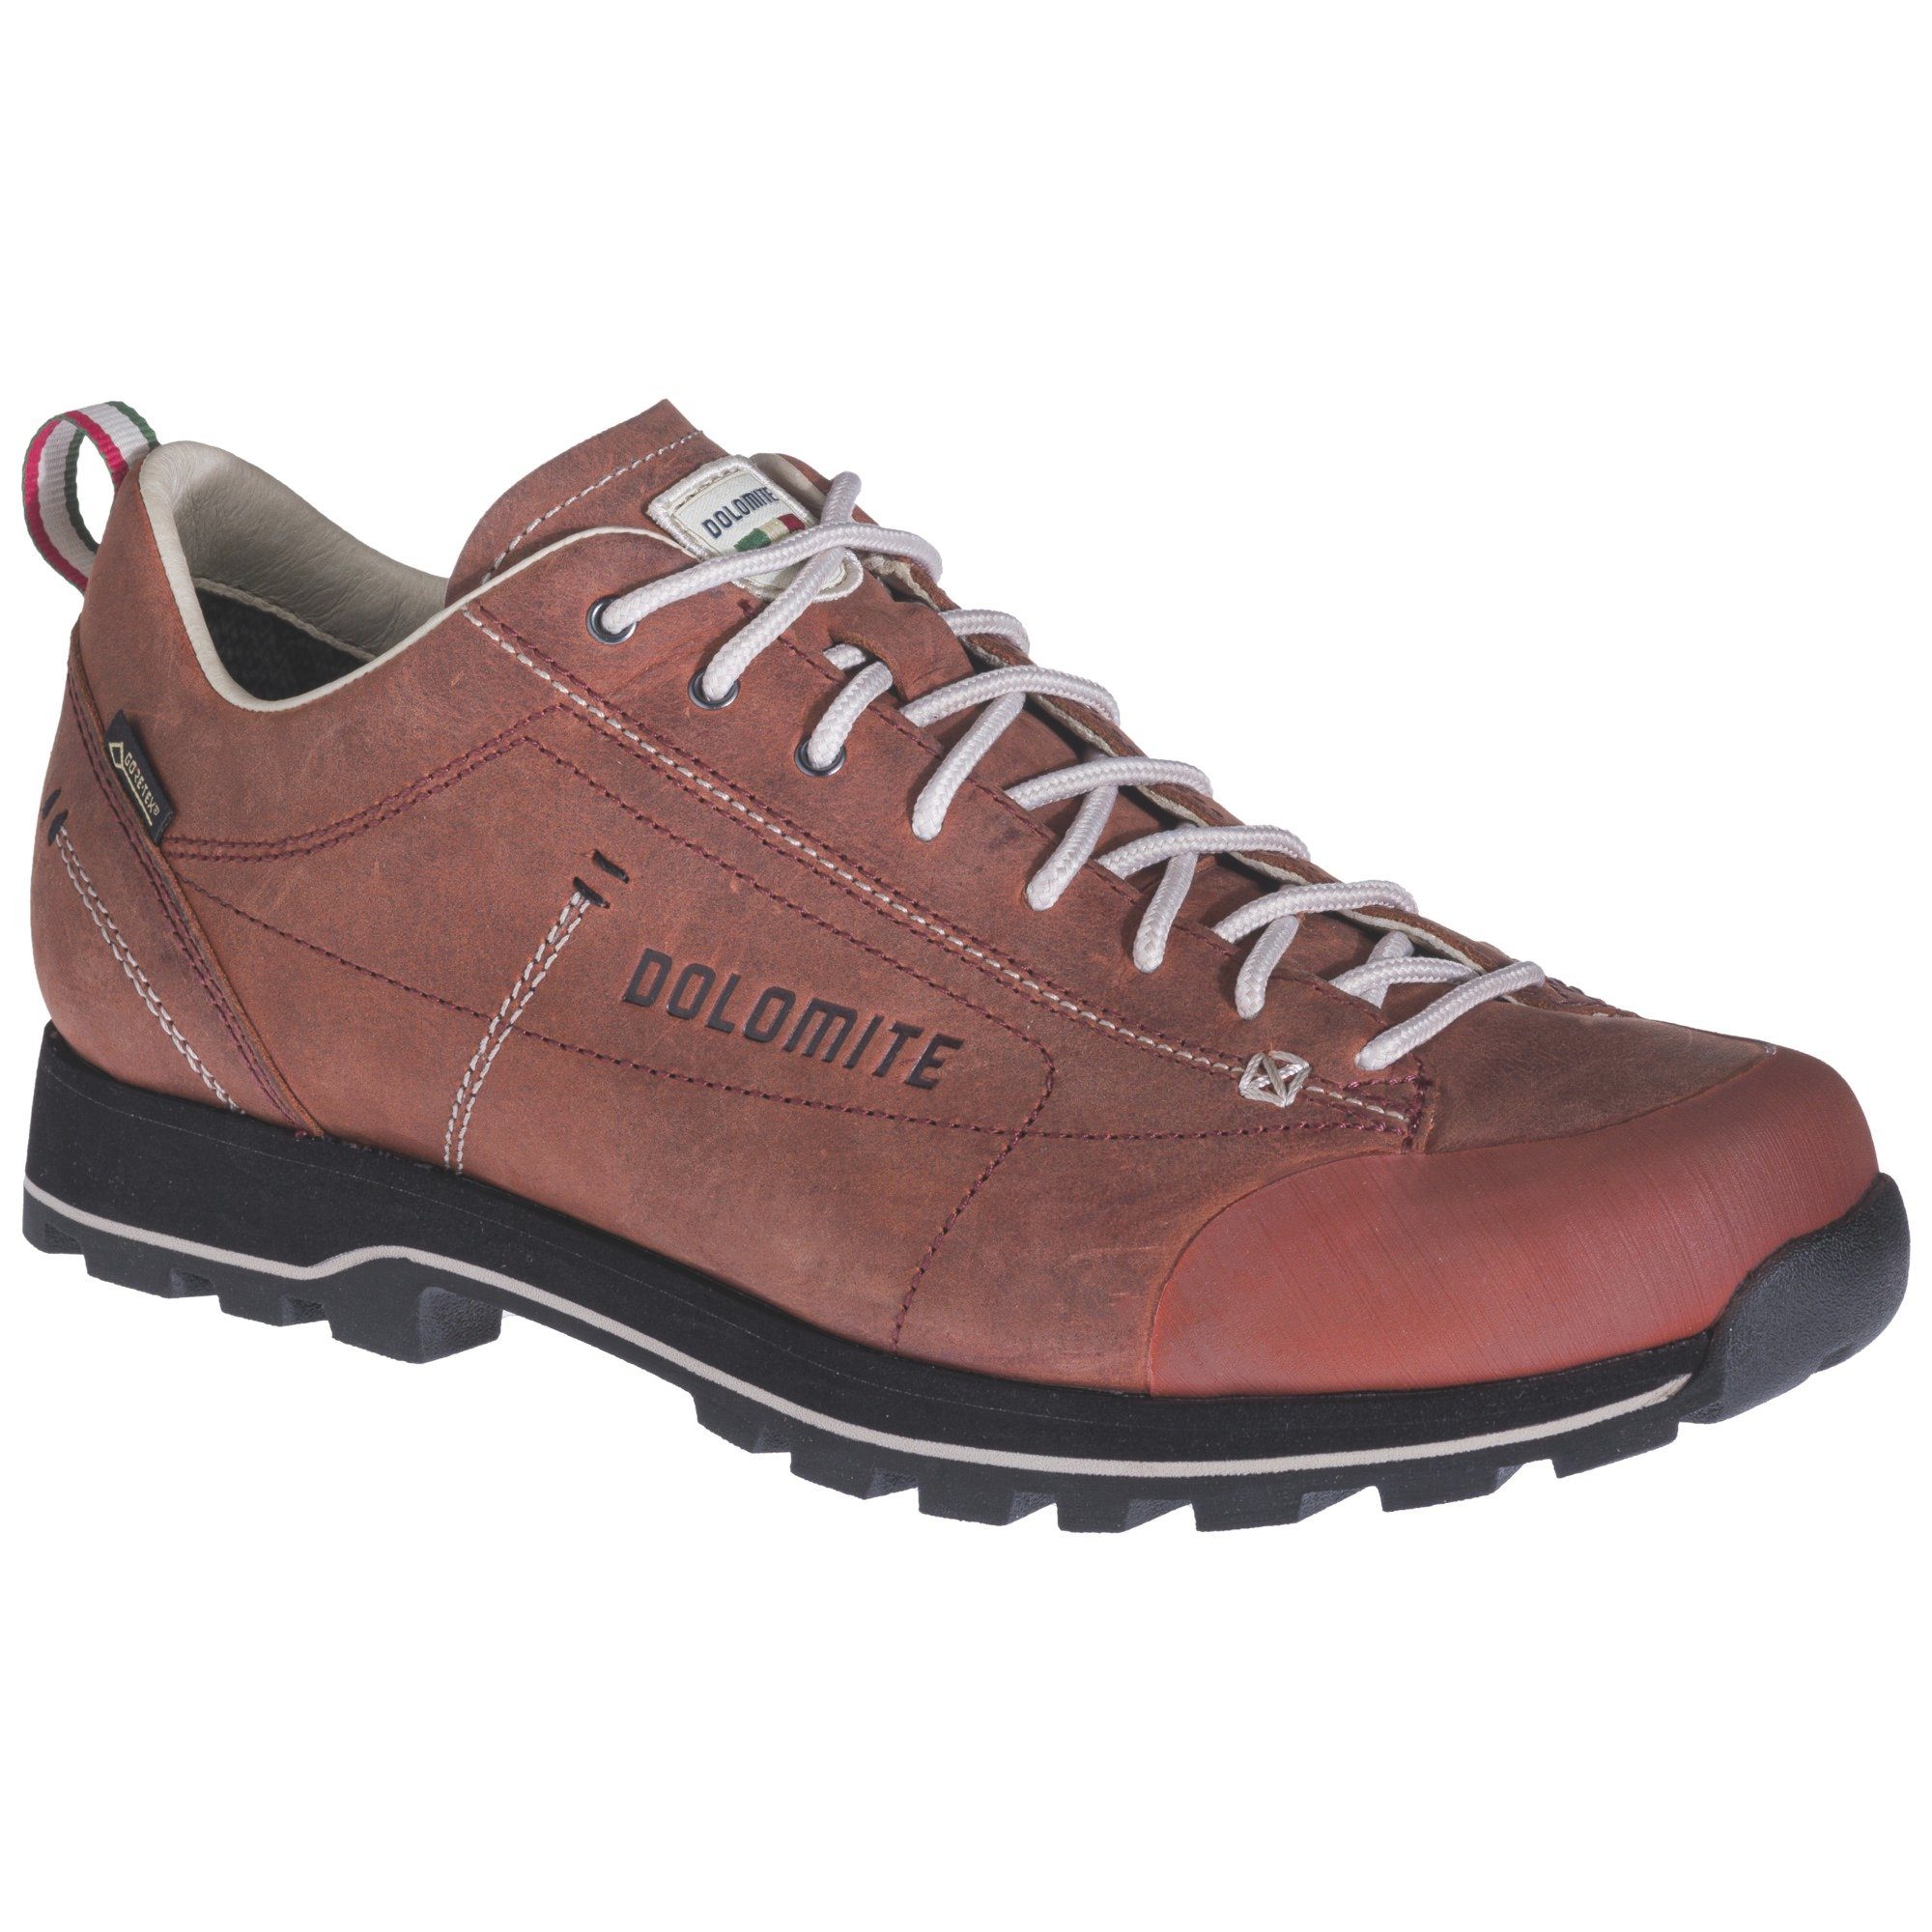 Dolomite Dolomite DOL Shoe Cinquantaquattro Low Fg Gt Outdoorschuh Ginger Red | 